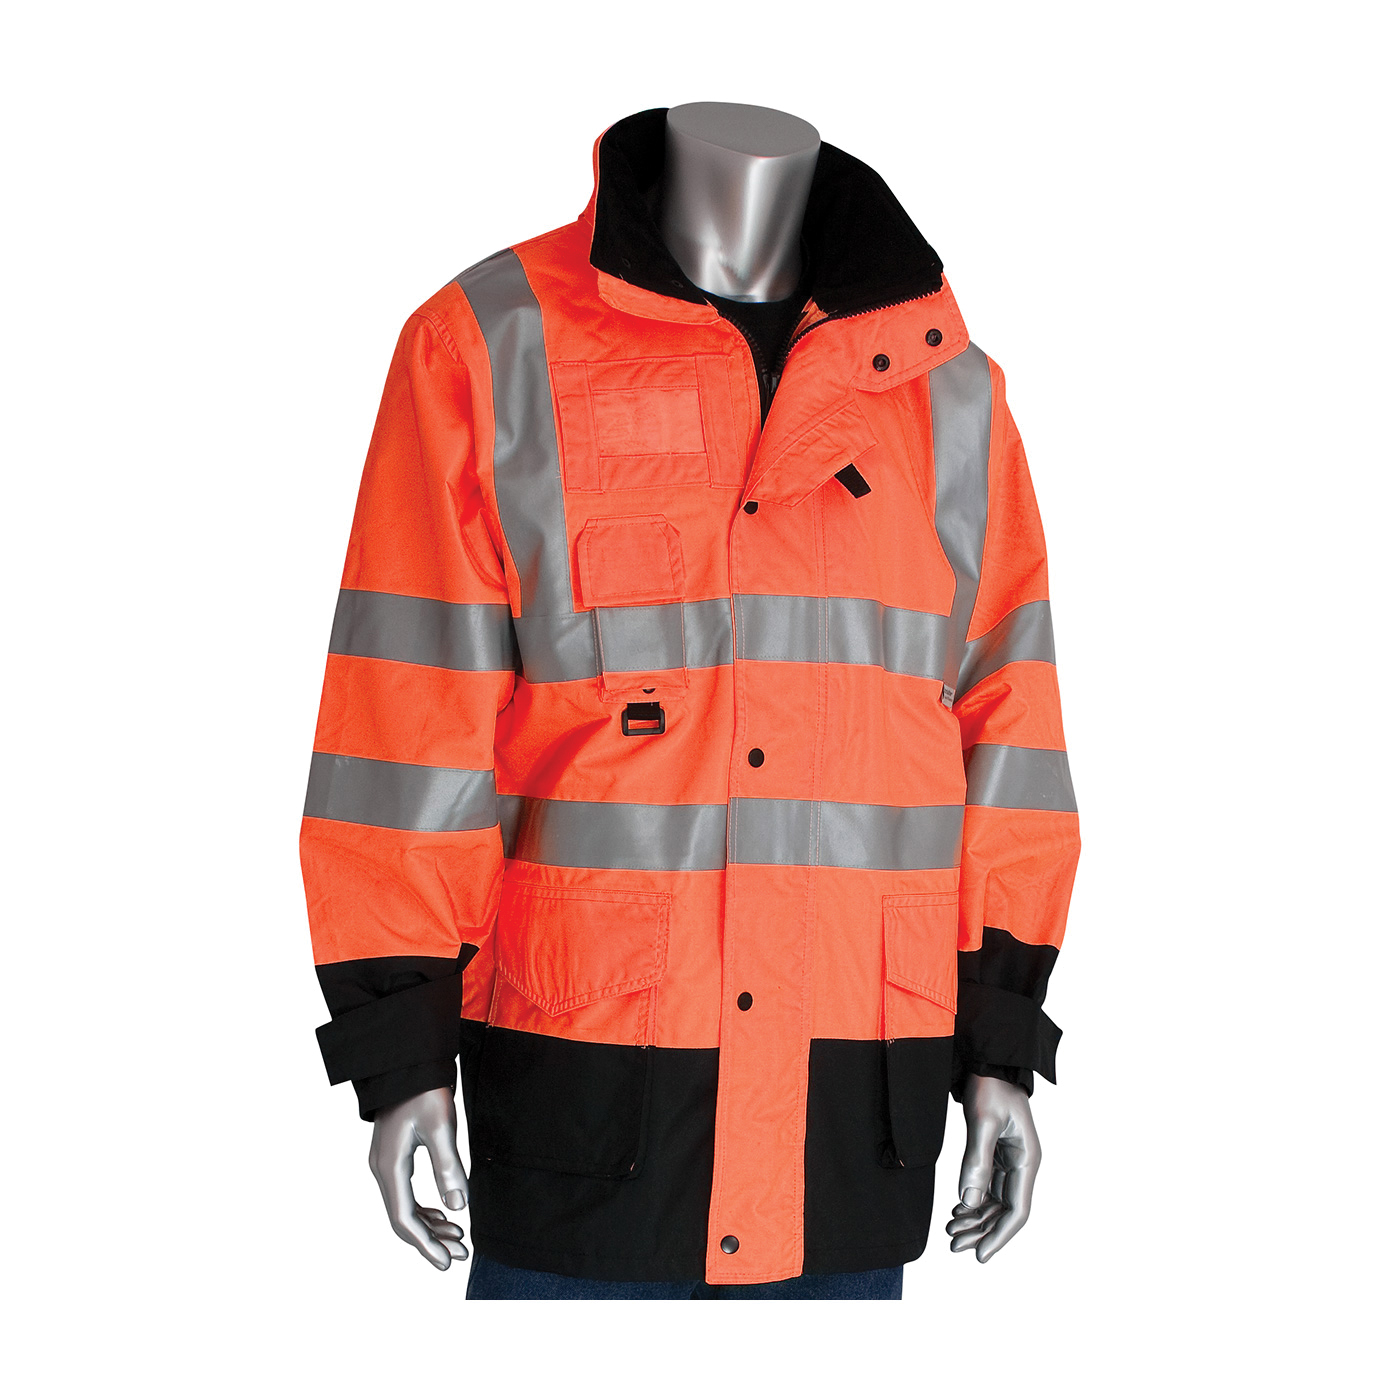 PIP® 343-1756-OR/5X 7-in-1 All Condition Winter Coat With Inner Jacket and Vest Combination, Hi-Viz Orange, Polyester, 70.3 in Chest, Resists: Water, Specifications Met: ANSI 107 Class 3 Type R